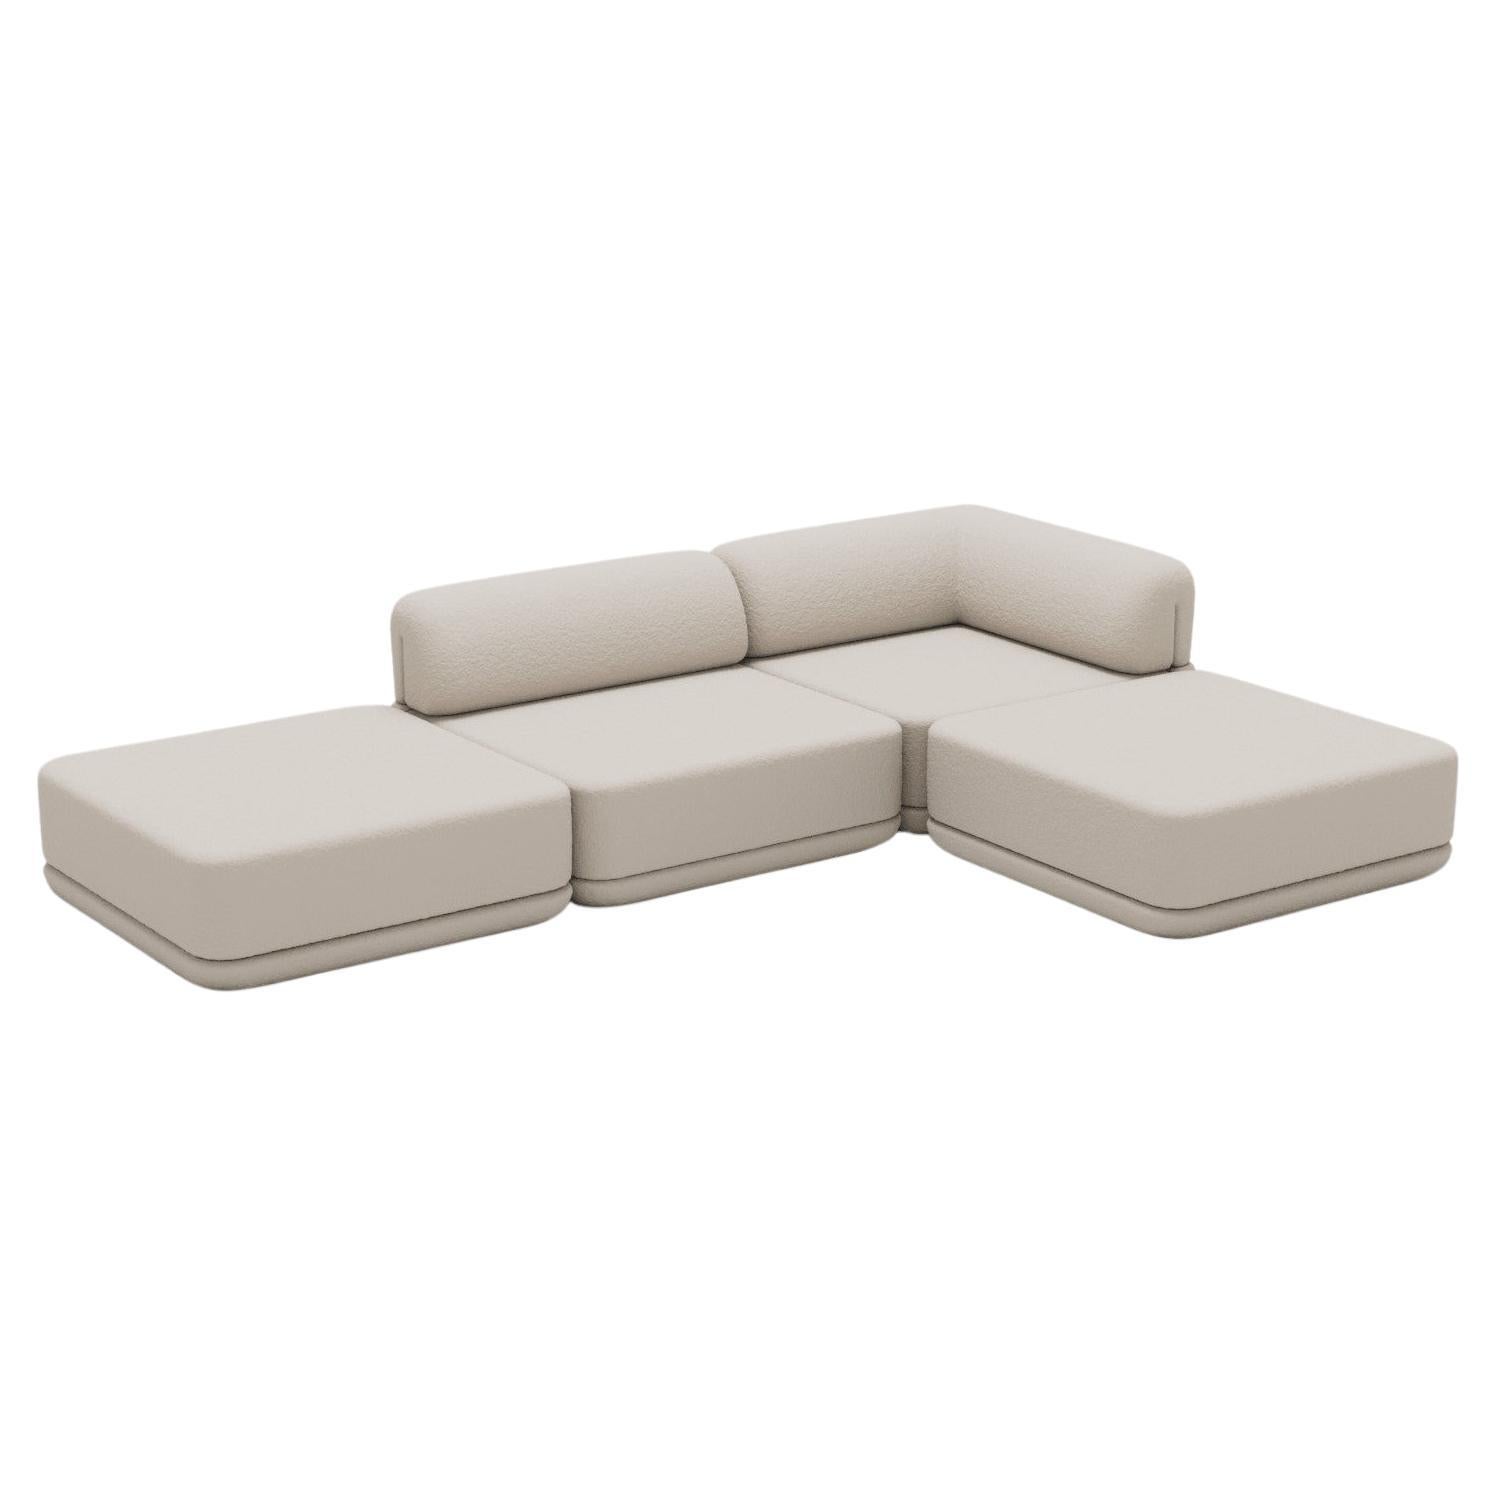 Low Mix Ottoman Sectional - Inspired by 70s Italian Luxury Furniture

Discover The Cube Sofa, where art meets adaptability. Its sculptural design and customizable comfort create endless possibilities for your living space. Make a statement, elevate